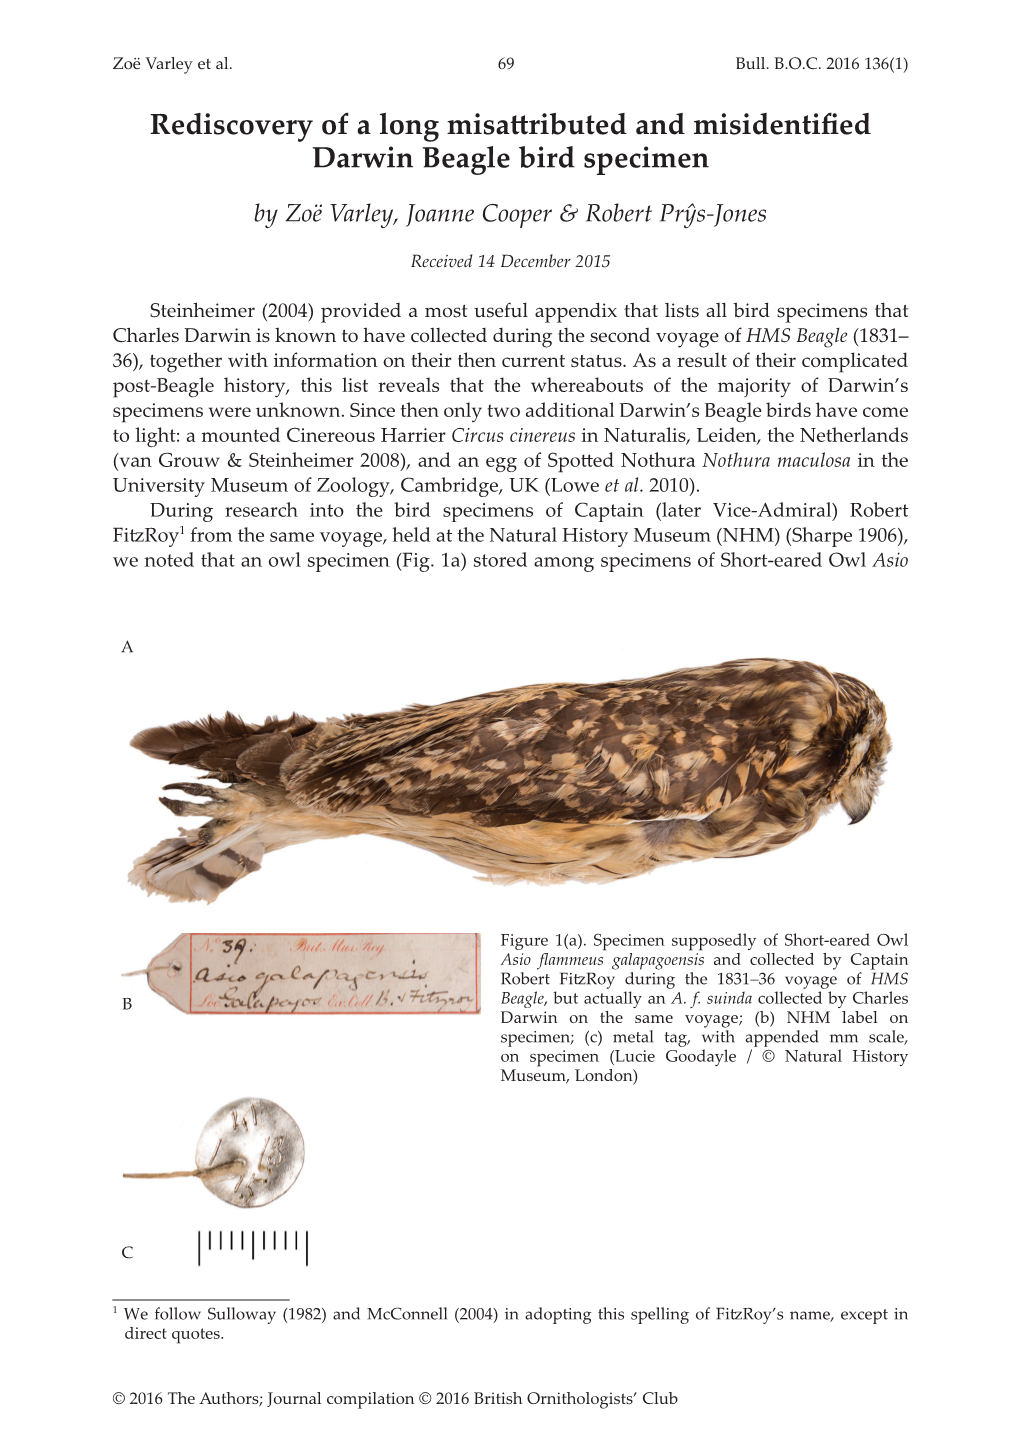 Rediscovery of a Long Misattributed and Misidentified Darwin Beagle Bird Specimen